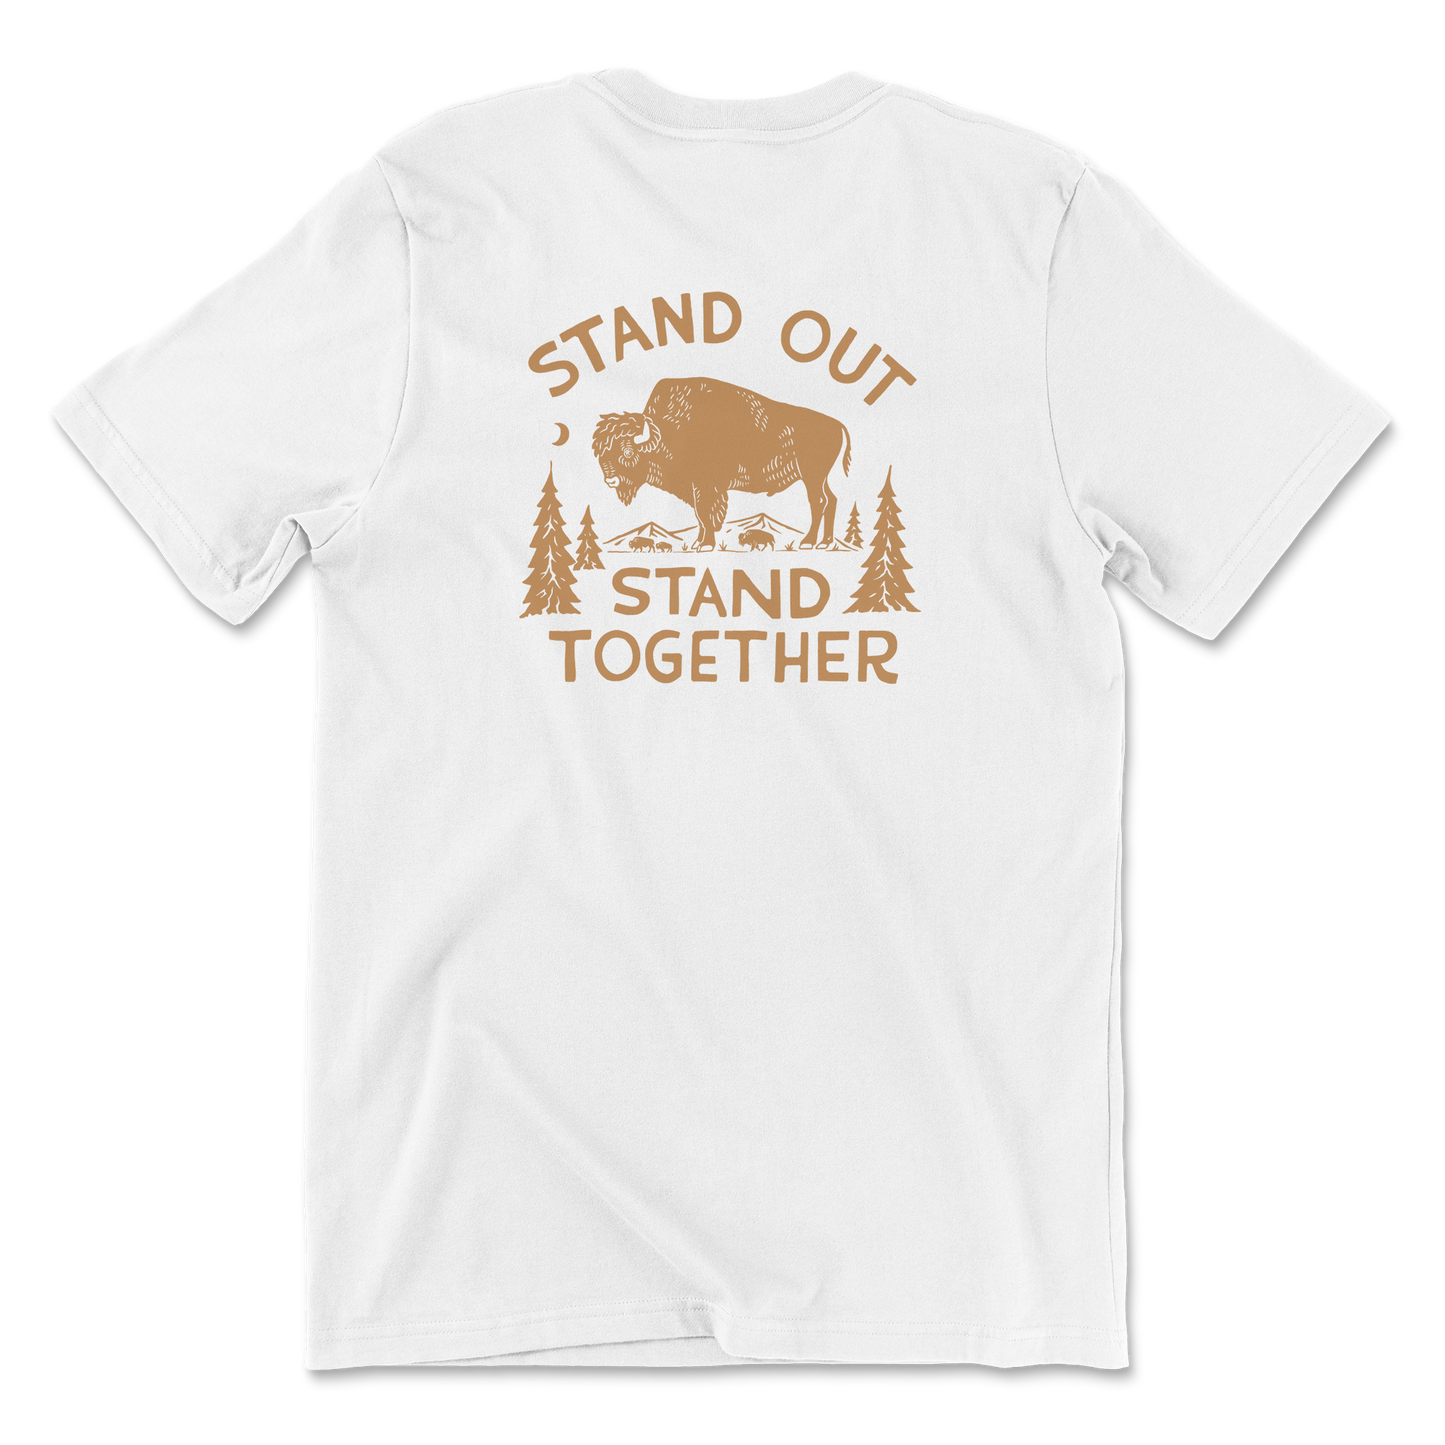 "Stand Out & Stand Together" White Tee